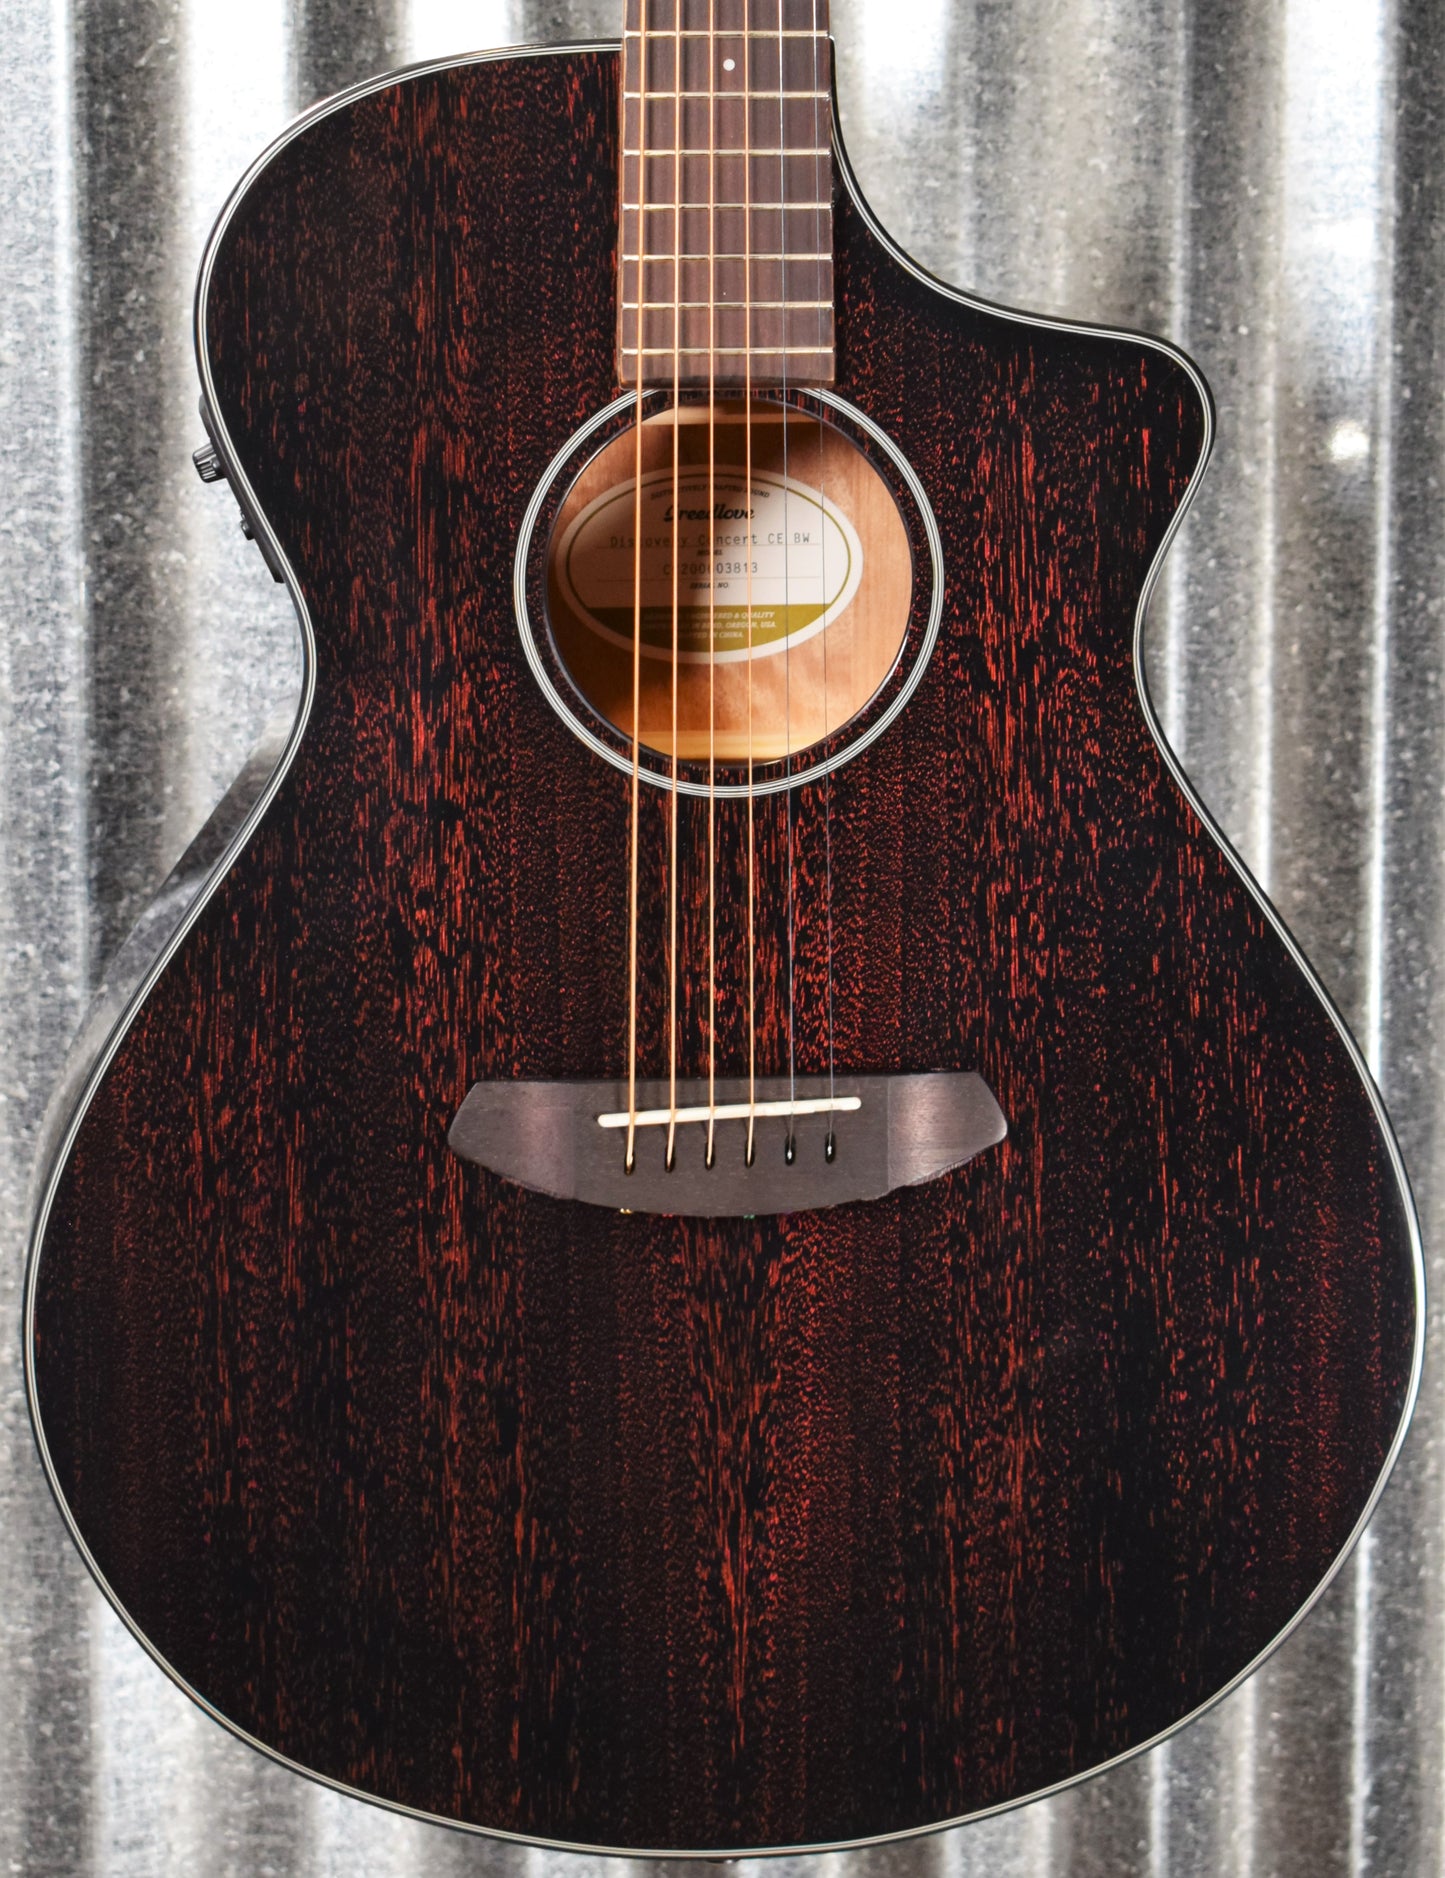 Breedlove Discovery Concert CE Black Widow Mahogany Acoustic Electric Guitar B Stock #3813